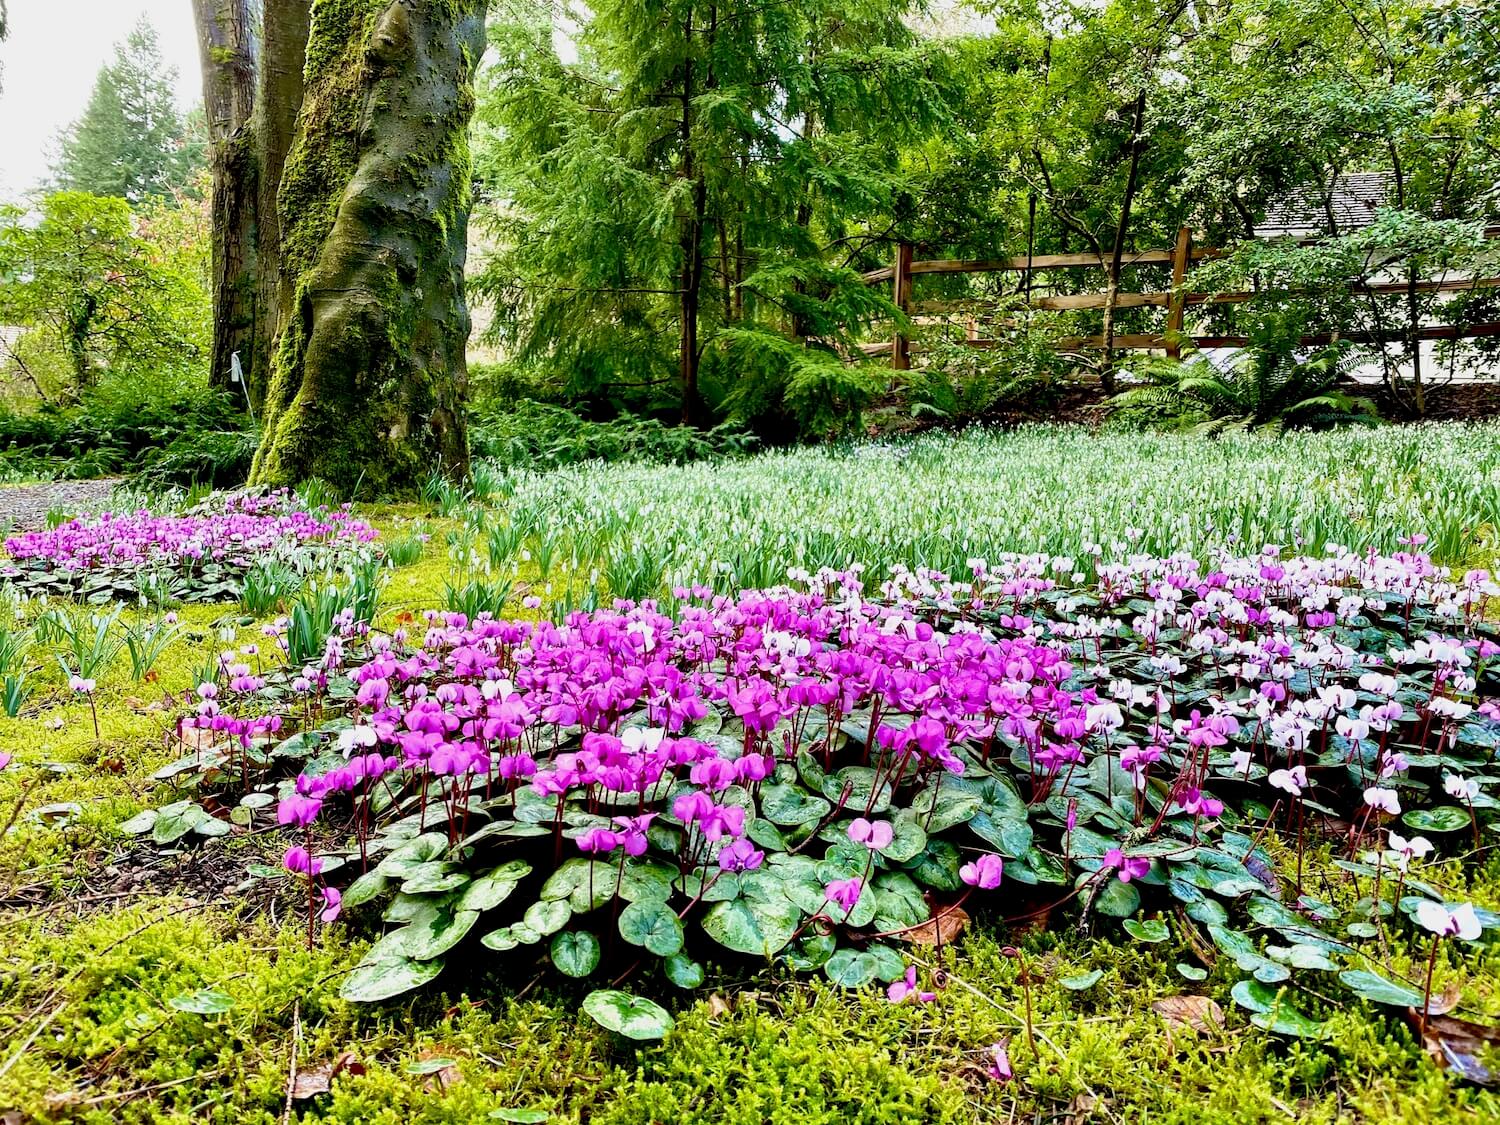 A beautiful carpet of bright green moss and freshly bloomed purple flowers spice up a wooded area with a fence in the background. Dunn Gardens in Seattle.